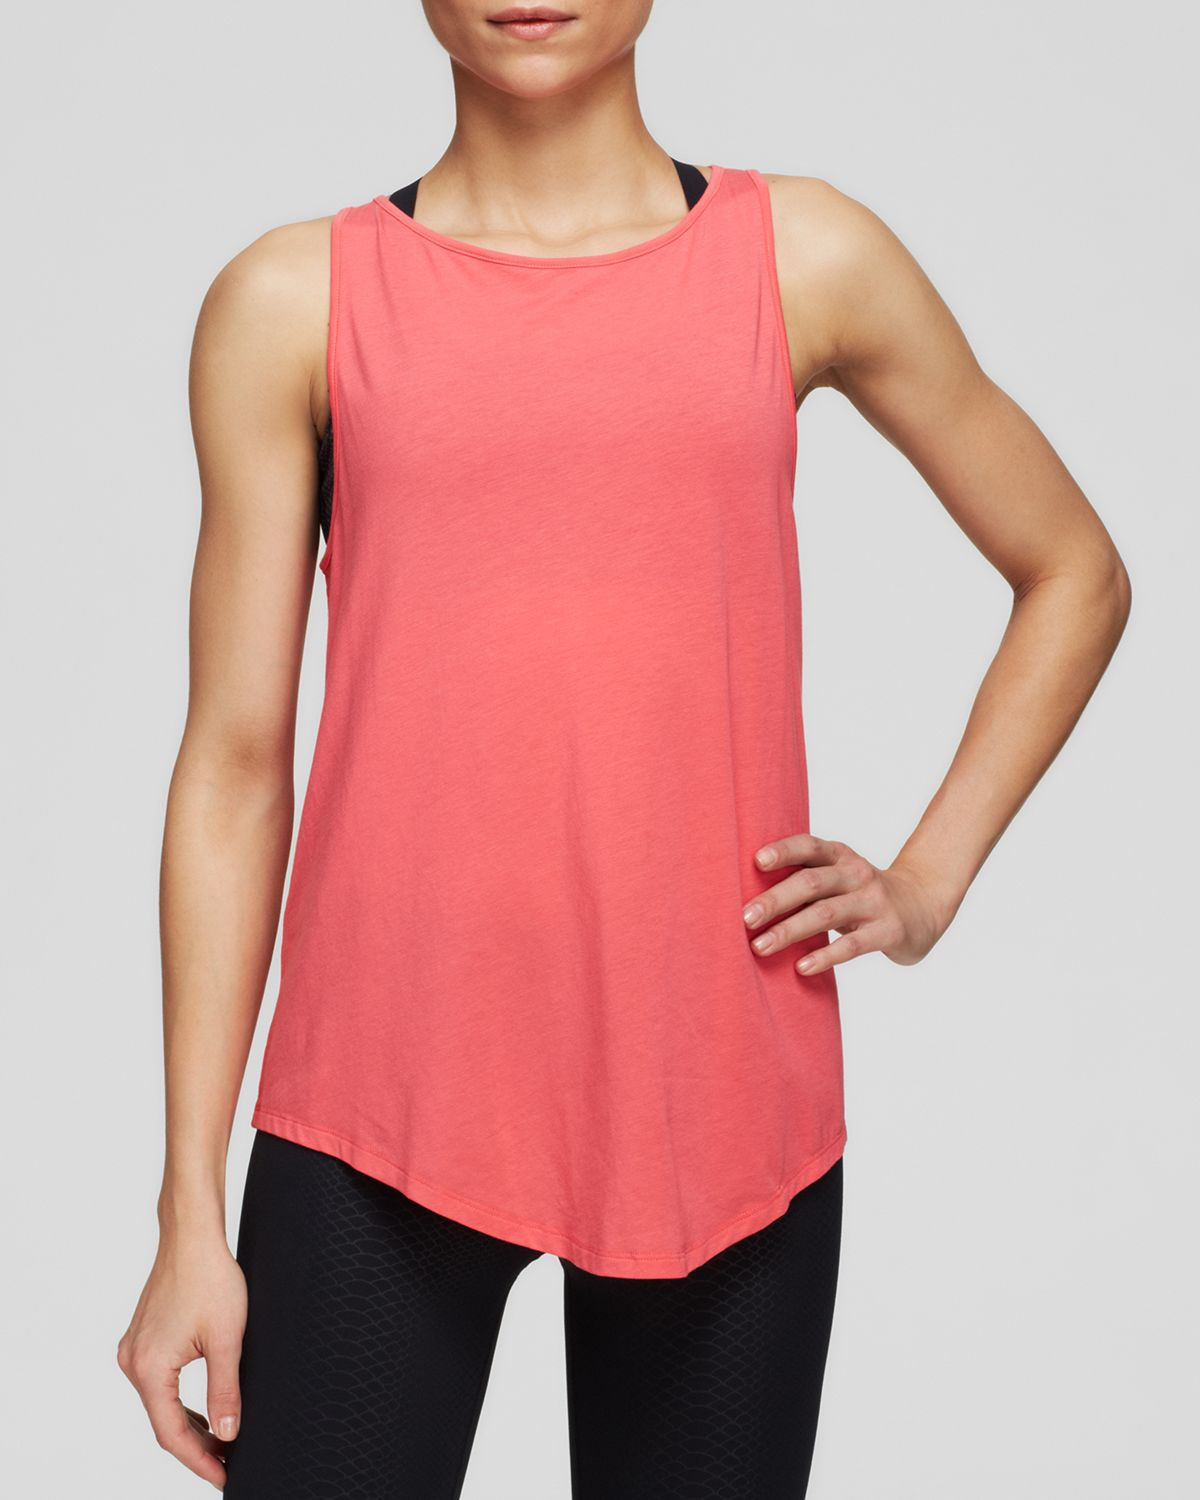 Under Armour Tank - Take A Chance Tie 